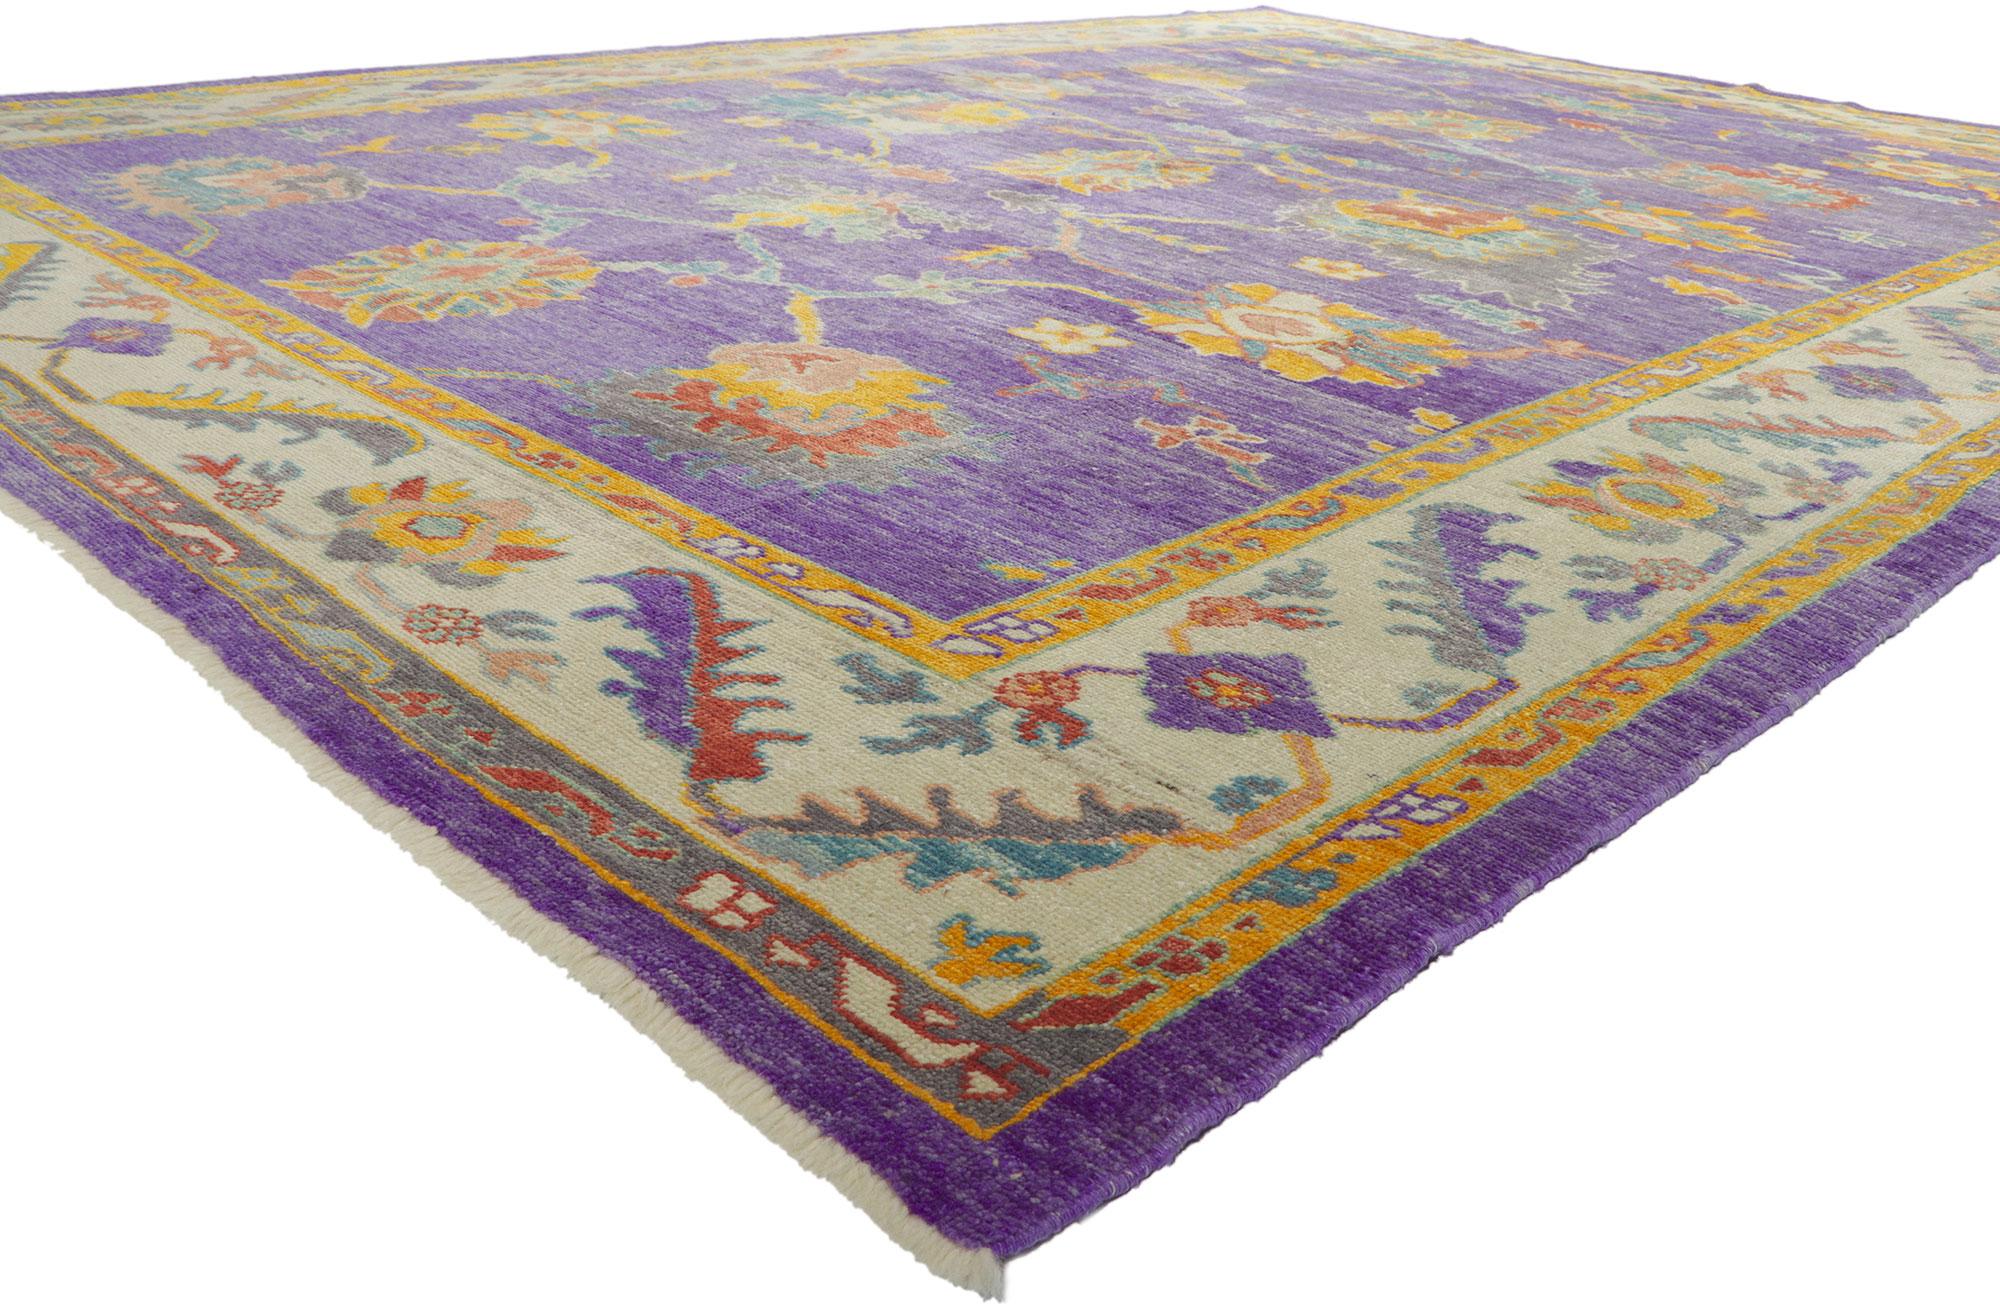 51887 Colorful Oushak Purple Turkish Rug, 10'04 x 14'04. Embark on a mesmerizing journey with our hand-knotted wool masterpiece – a colorful Turkish Oushak rug that transcends the ordinary, beckoning the spirit of maximalist allure. Picture a